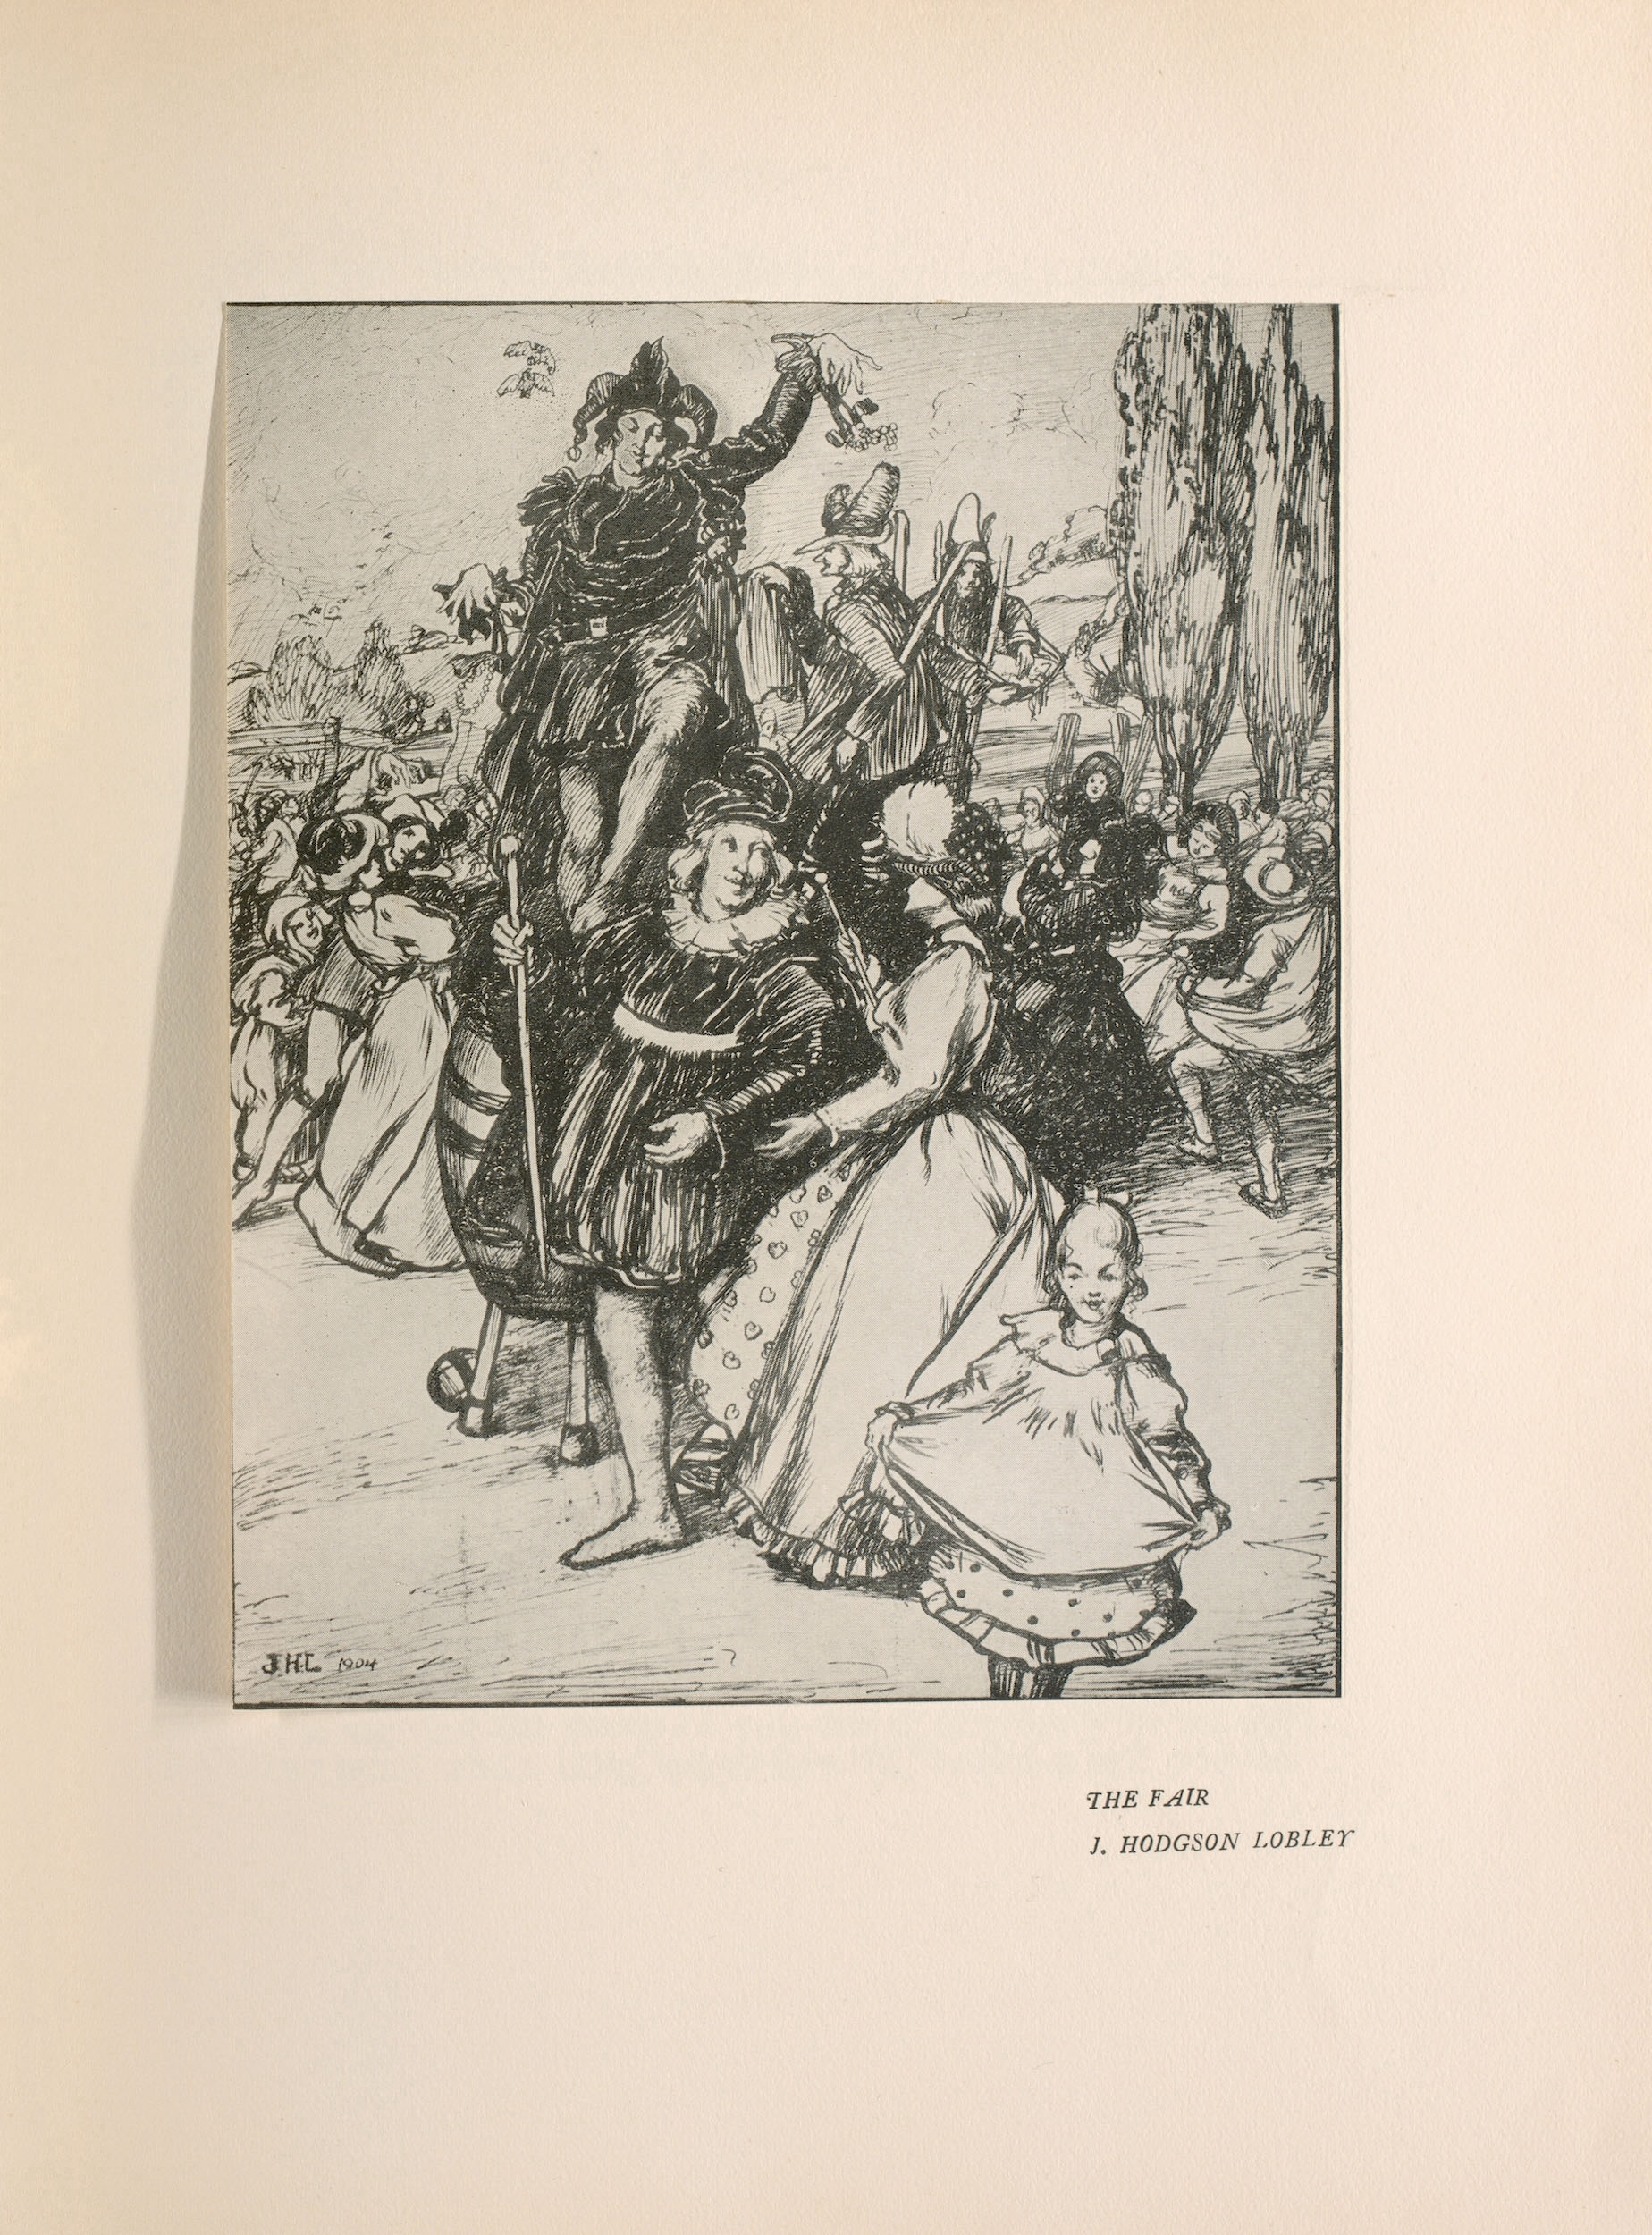 The black-and-white image is in portrait orientation and is tipped in on the center of the page. The image depicts an outdoor scene in which a crowd of people is moving in procession from right to left. In the extreme foreground, near the bottom right corner, a young girl with her hair tied back in a bow walks forward, holding out the bottom of her apron in curtsy position. Immediately behind her are a man and woman, who turn to each other to converse. The man is dressed in a Renaissance-style doublet and leggings, wears a turban or rounded crown made of fabric, and carries a baton or pace. The woman to his right wears a long, light-coloured dress covered by a heart-stamped apron and a feathered turban or hat; she is also carrying a baton or pace stick. Behind this couple, a jester brandishing loops of bells in each hand is elevated on a barrel. Behind the jester, there are two men on stilts wearing tall, rounded hats; behind them is a large crowd of people, dancing. There are tall trees in the right background and a hilled landscape in the far distance behind the crowd. There are two birds in the sky to the left of the jester. There is a small inscription “JHL 1904” on the bottom left corner of the image.